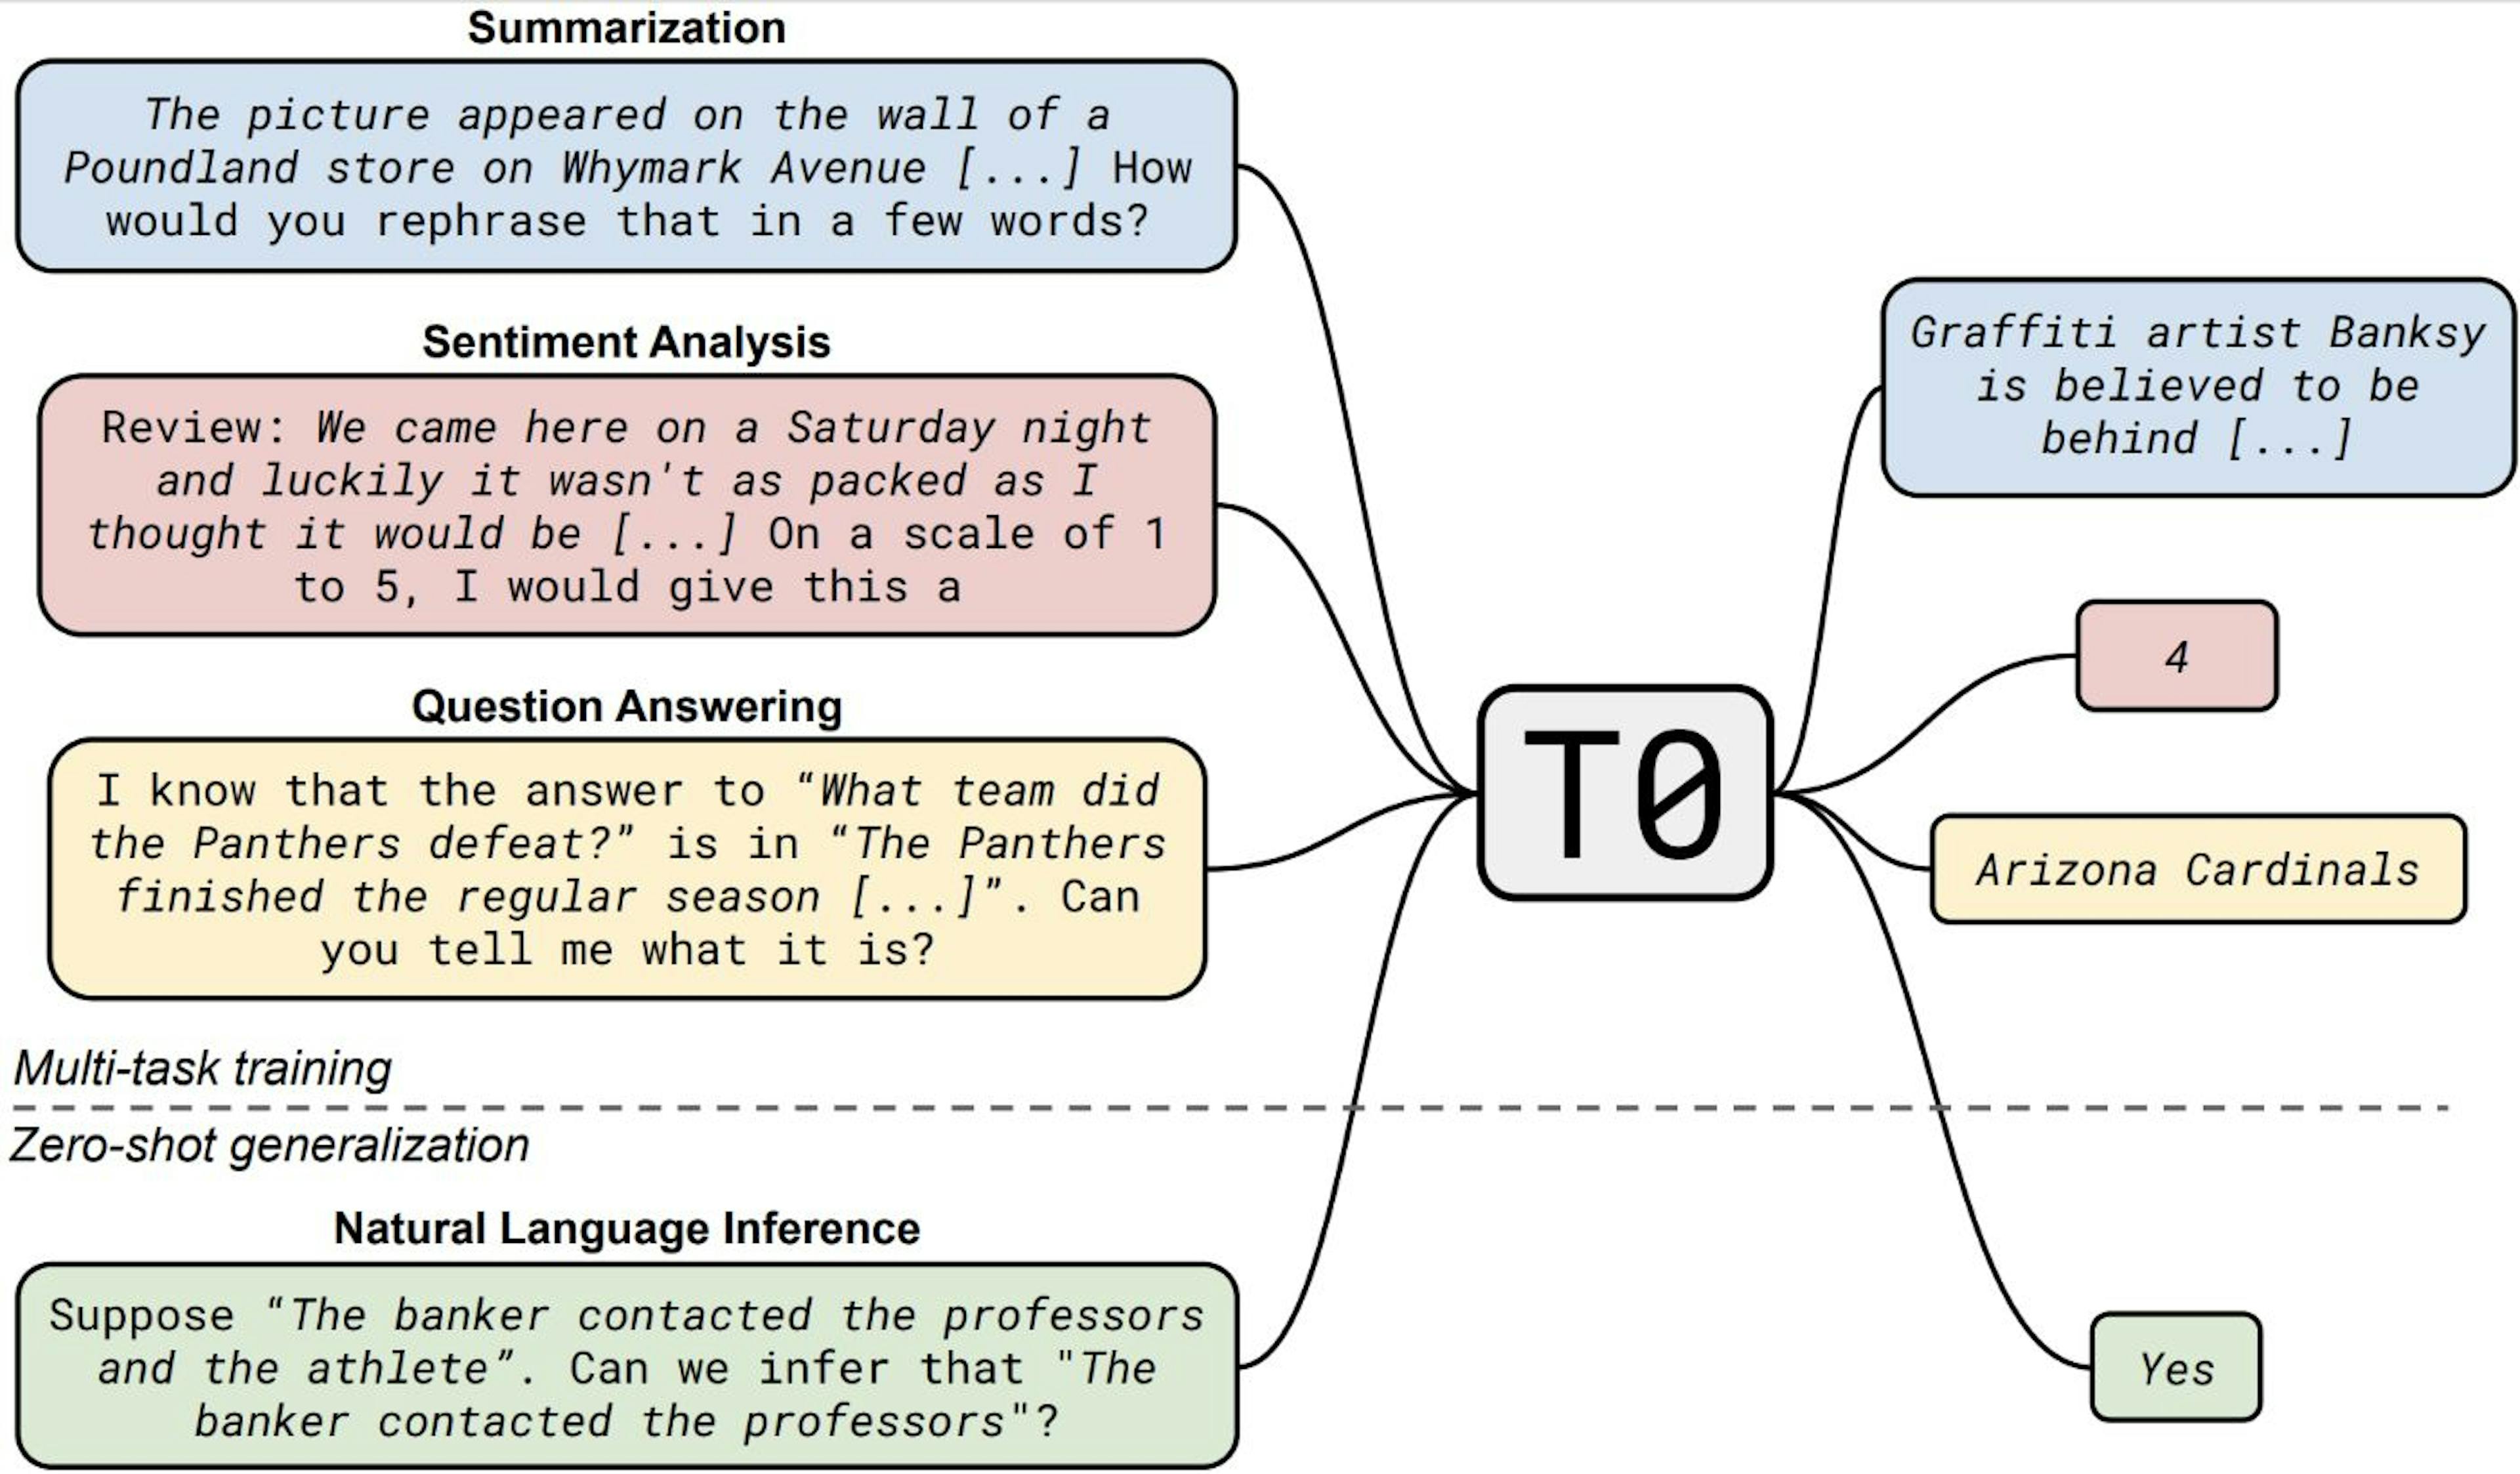 Example of how T0 (an encoder-decoder model that consumes textual inputs and produces target responses) is trained on explicit task formulations for a wide range of linguistic tasks, including sentiment analysis. Source: HuggingFace Blog on BigScience